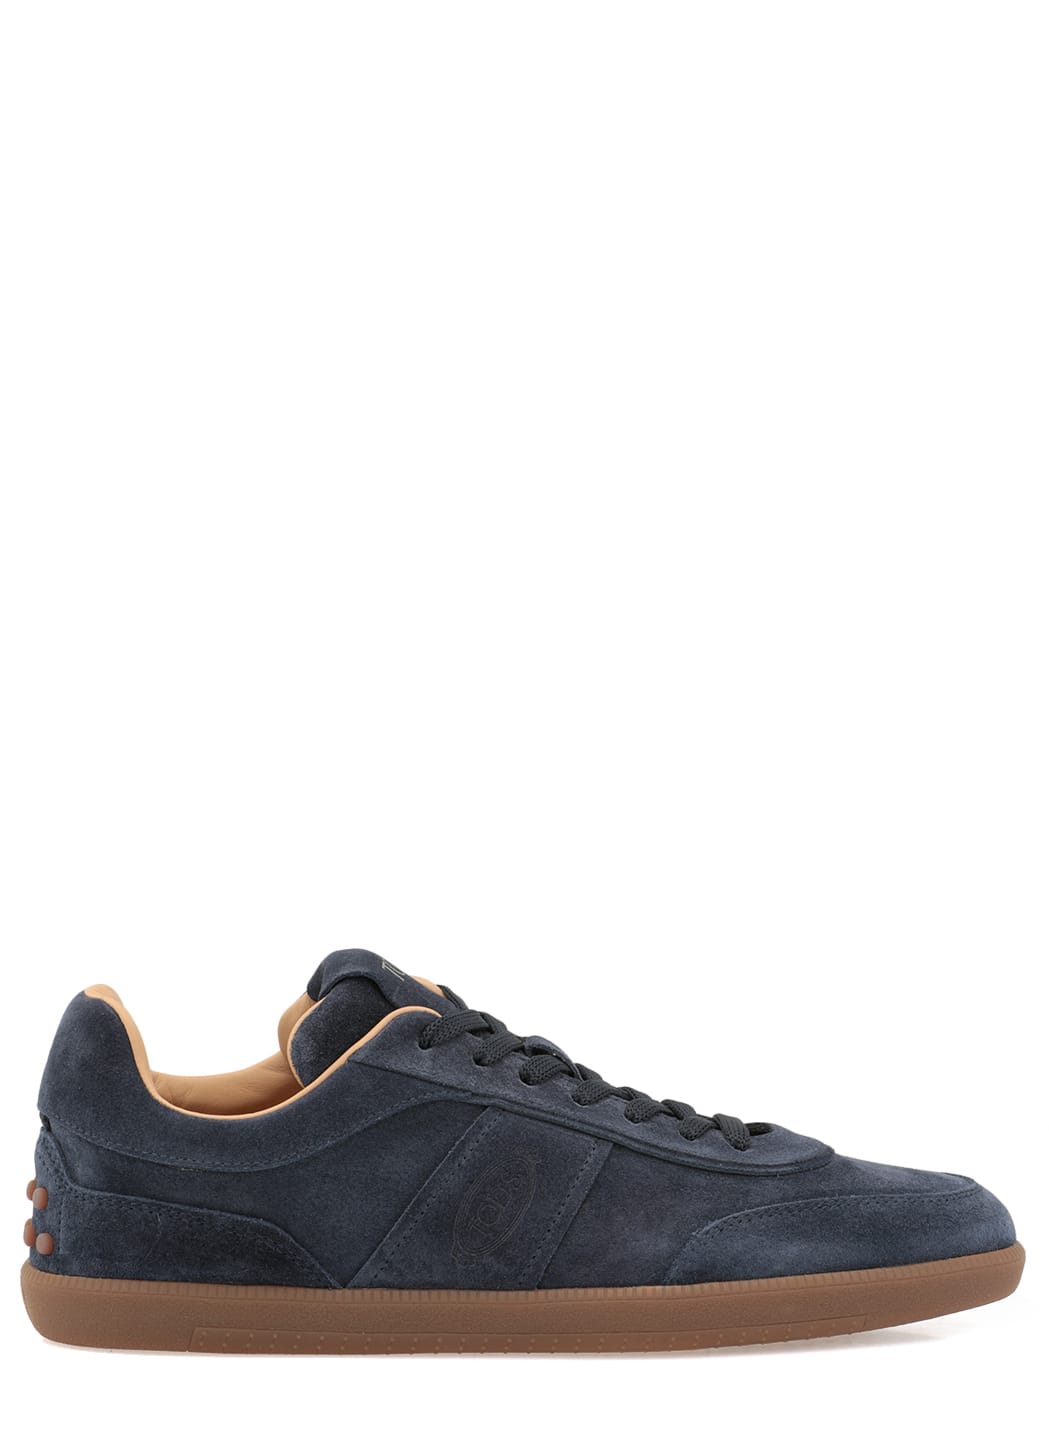 Tods Suede Leather Tabs Sneaker